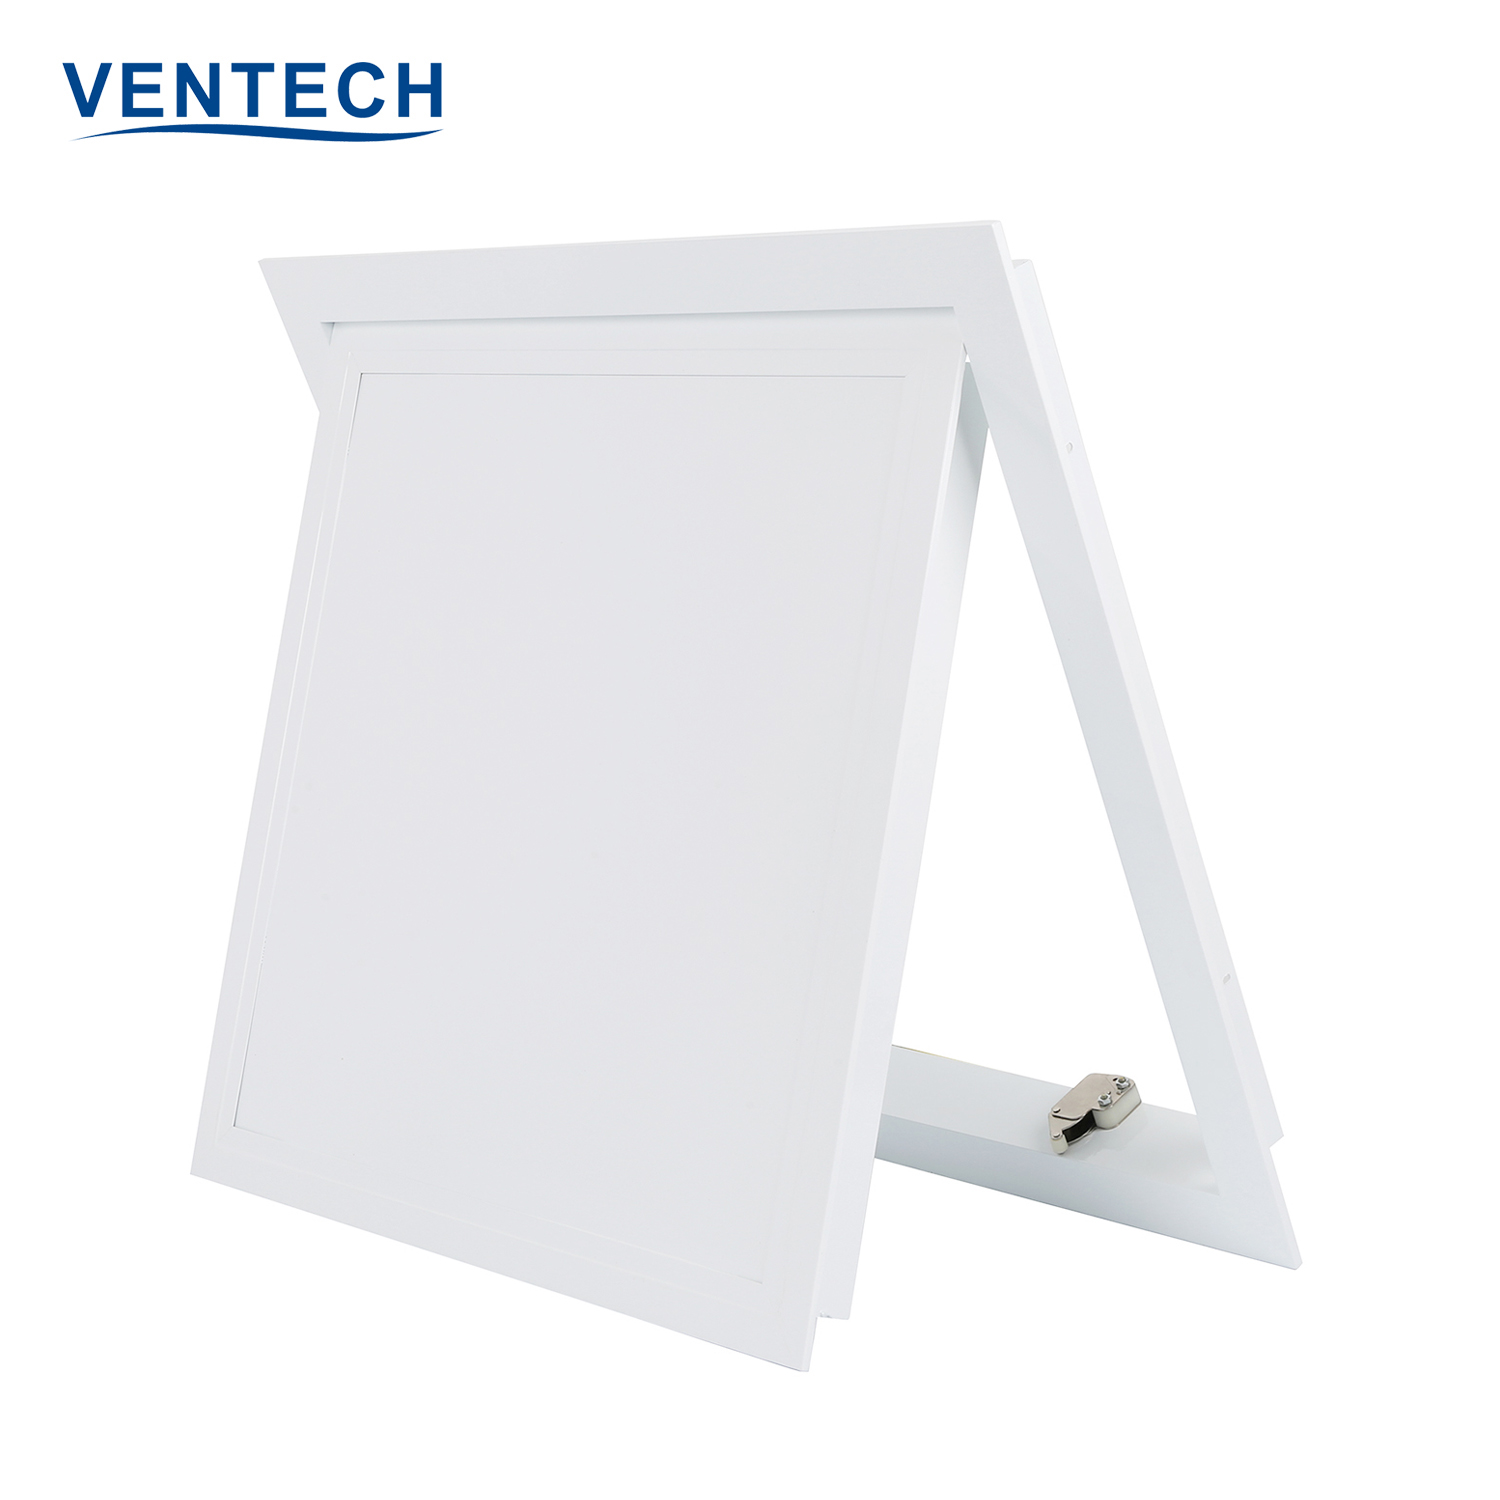 Ventech top selling hvac access doors wholesale for air conditioning-2